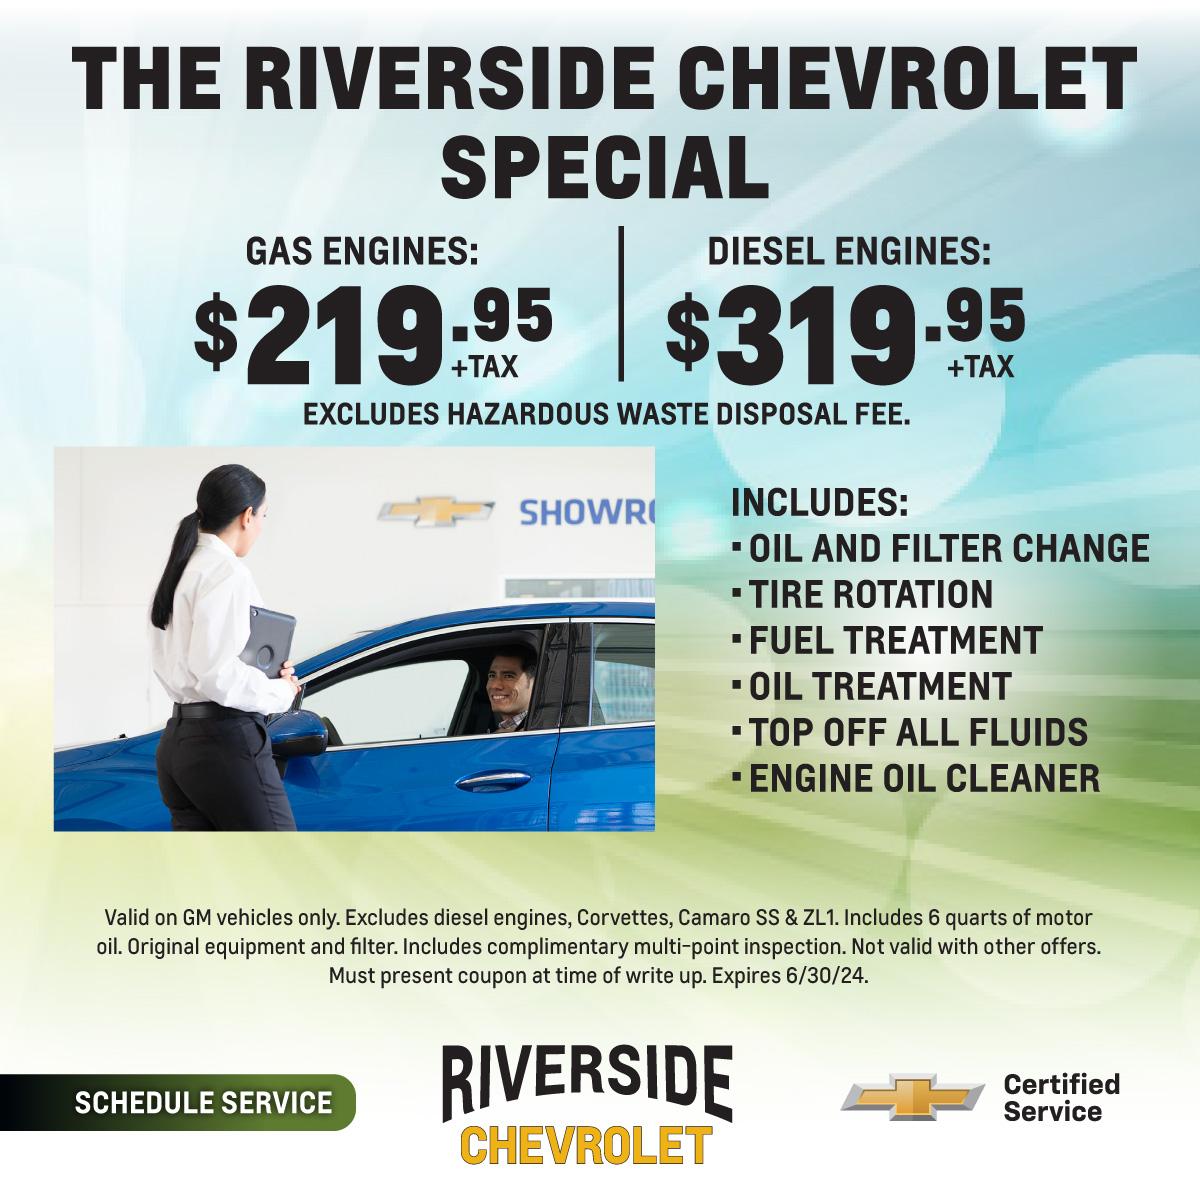 The riverside Chevrolet special 